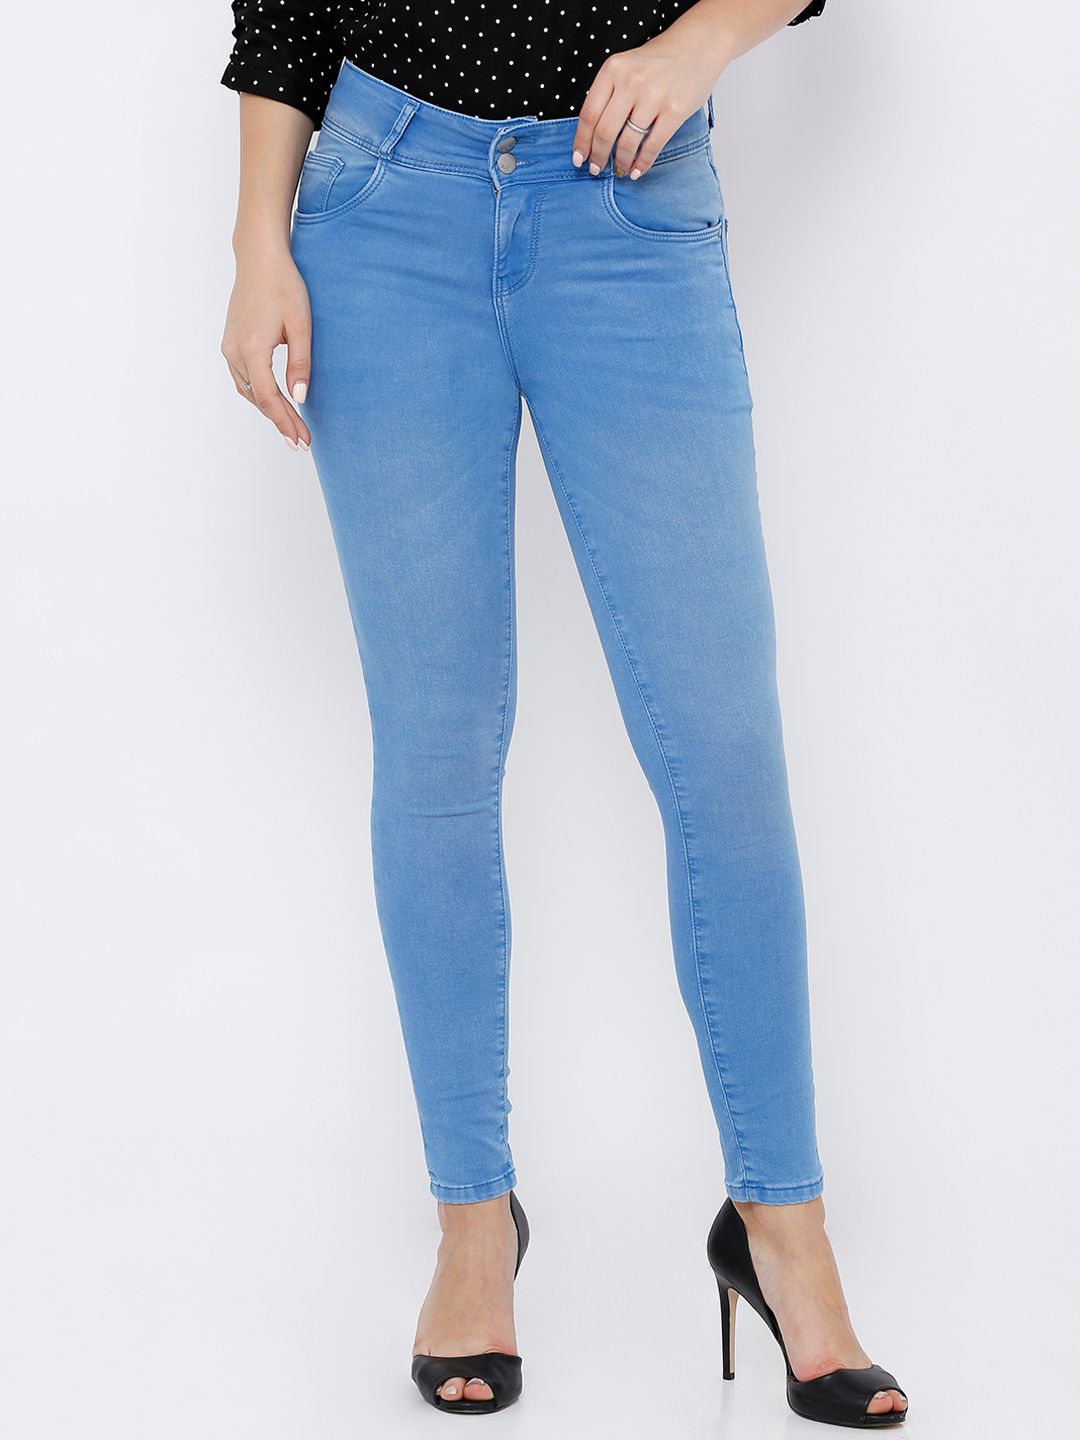 Kraus Jeans Women Blue Skinny Fit High-Rise Light Fade Stretchable Jeans Price in India